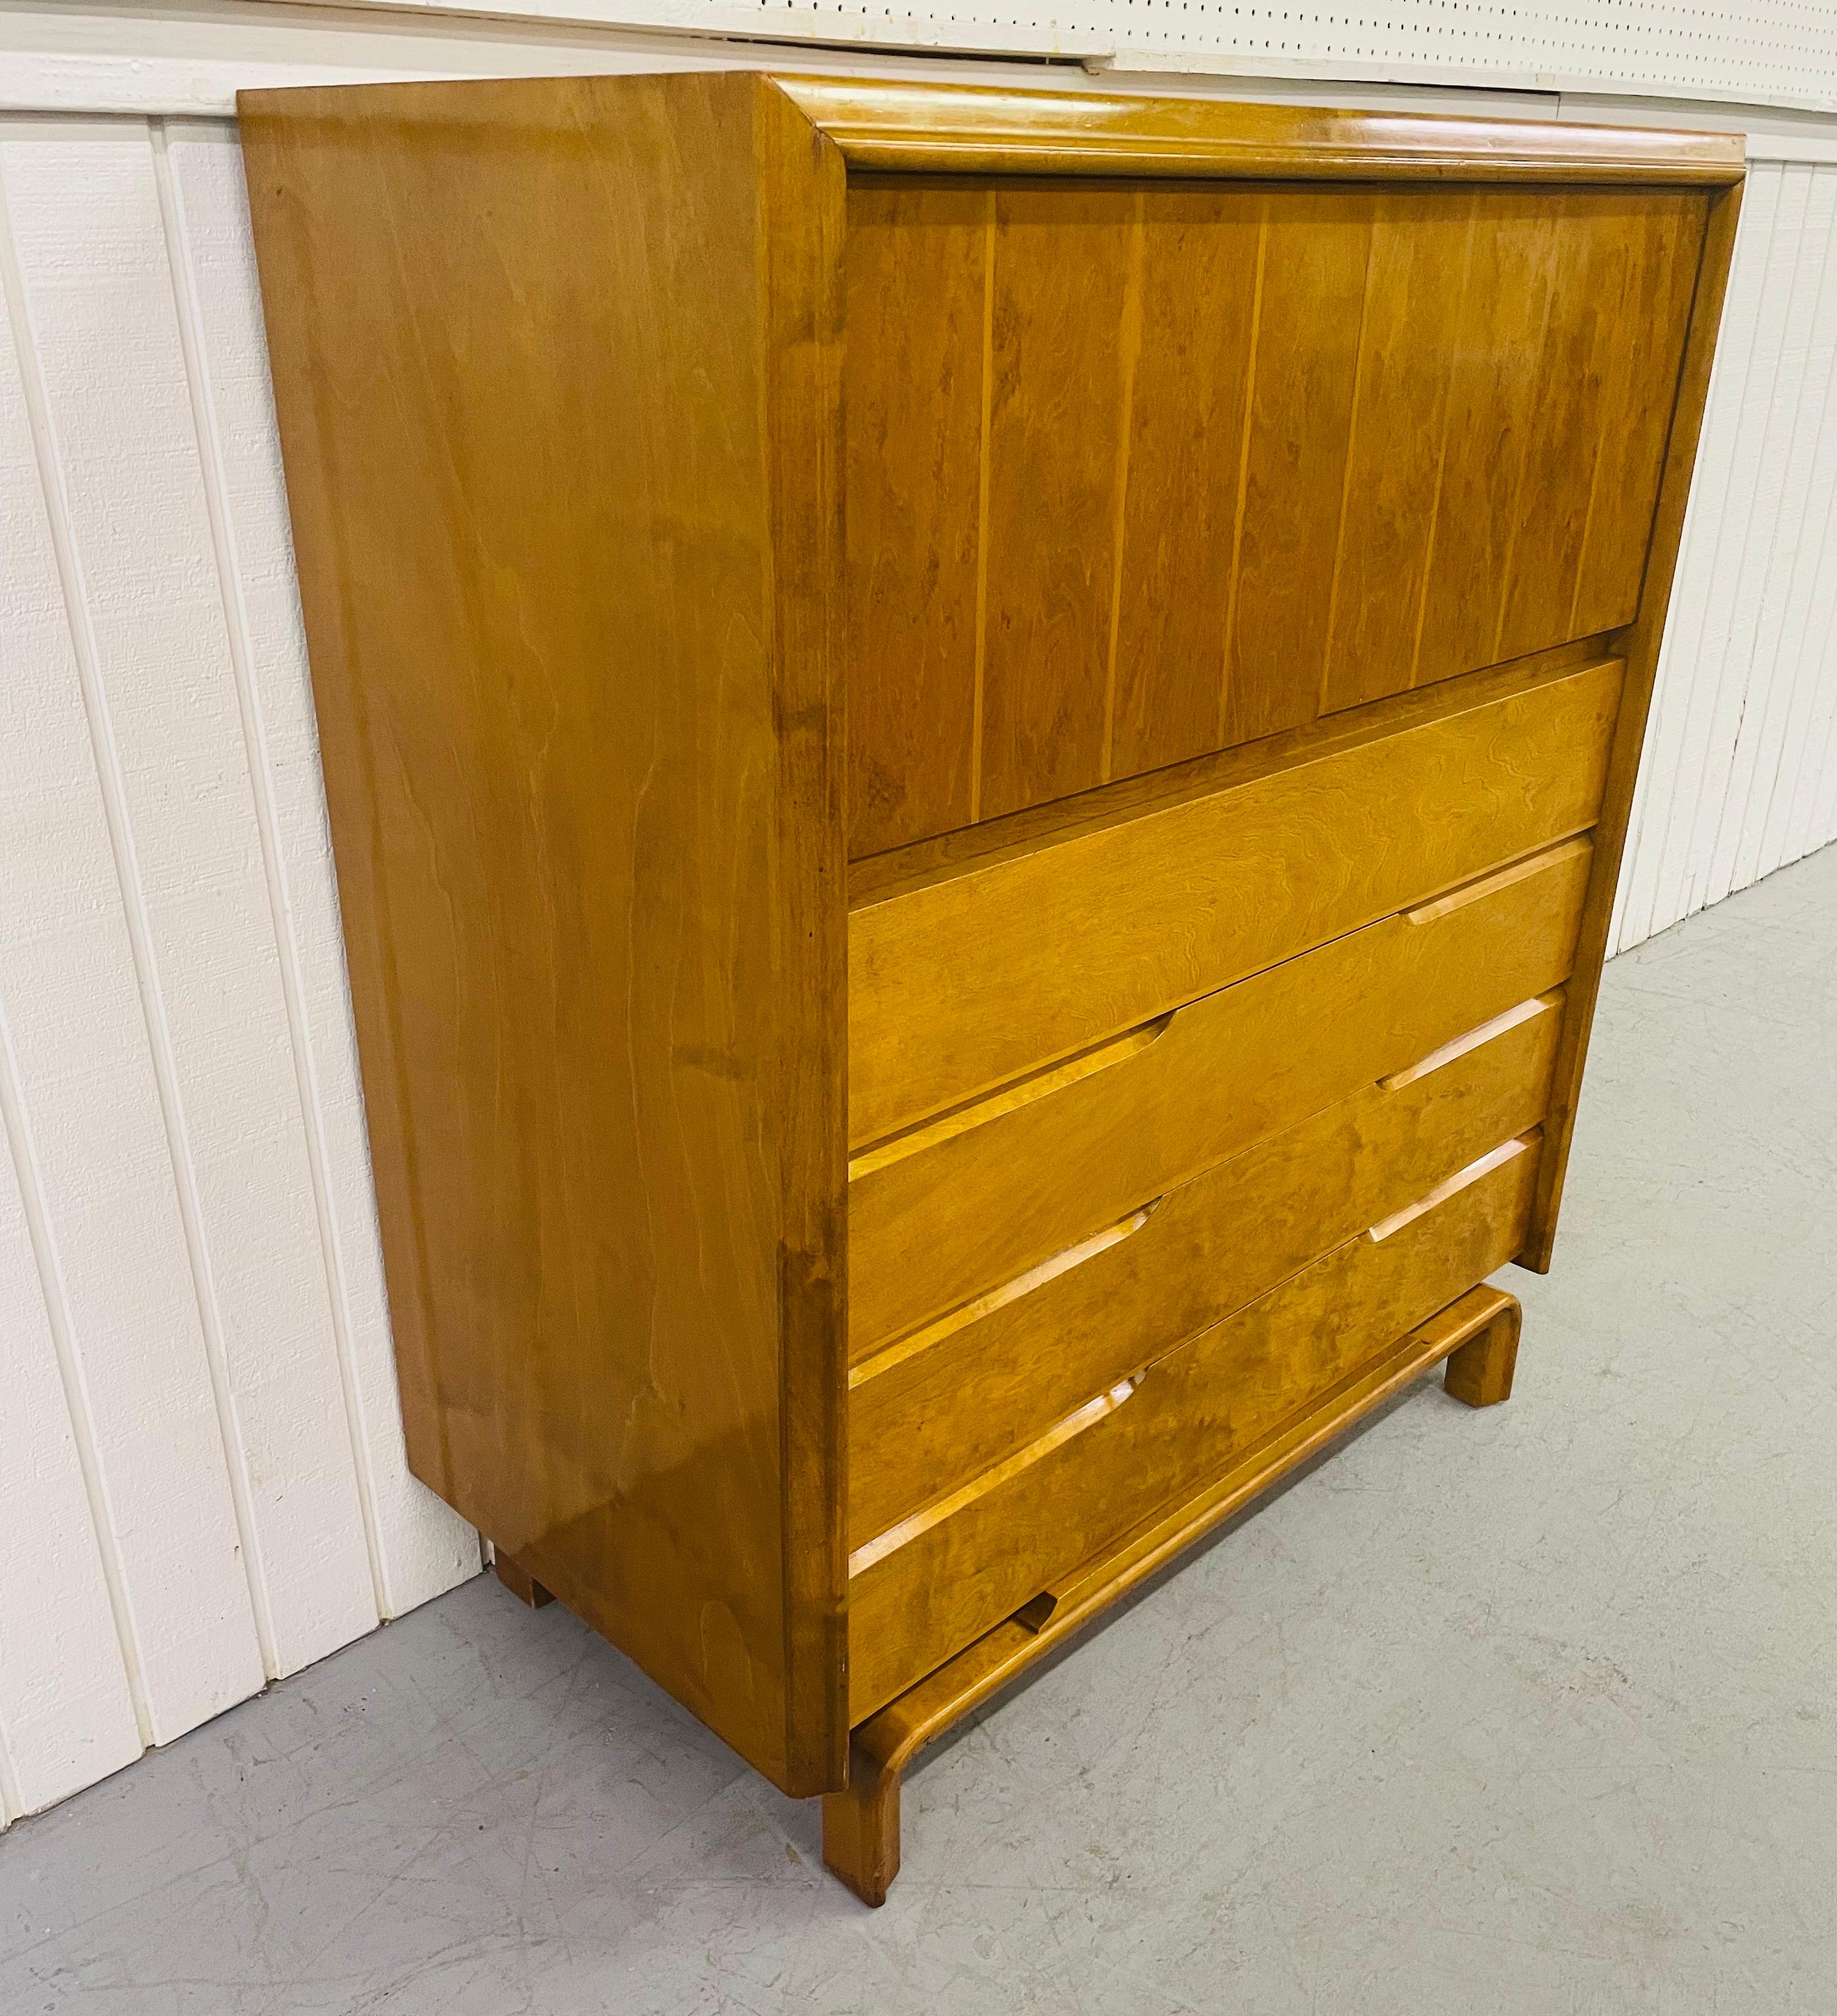 This listing is for a mid-century Edmond Spence high chest. Featuring two doors that open up to storage space, four drawers, and a beautiful champagne blonde finish.